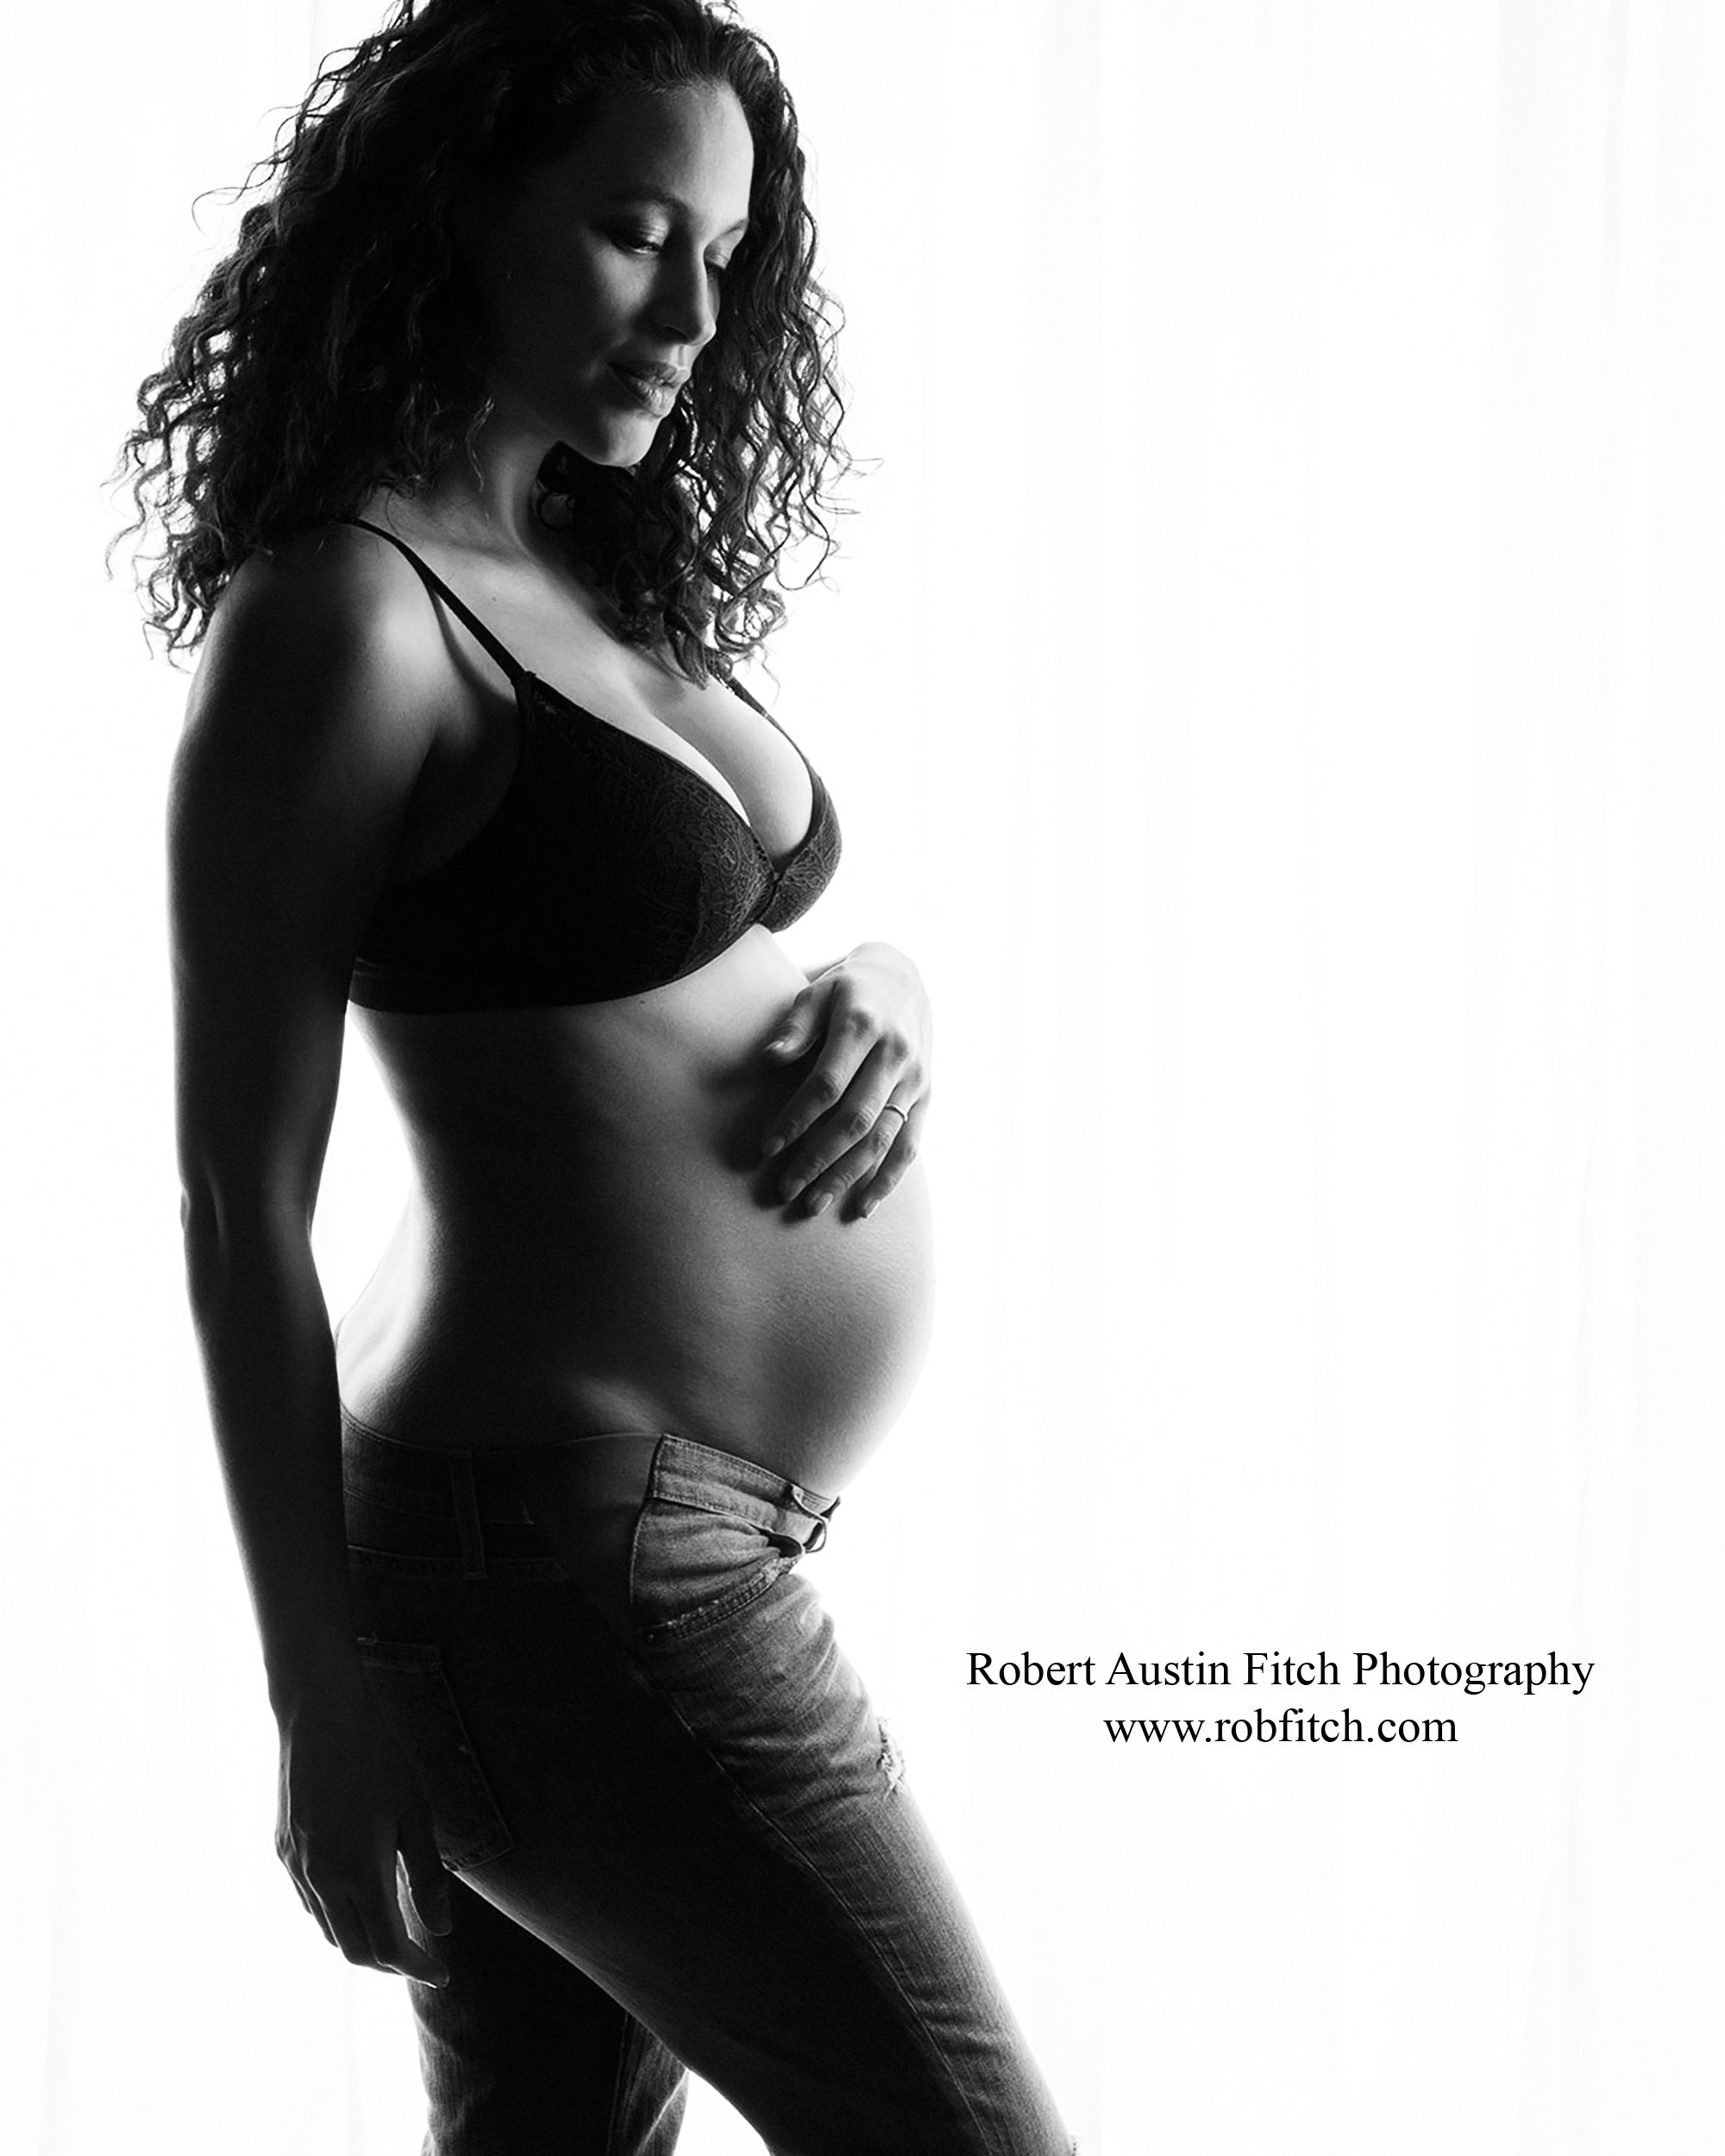 Silhouette maternity photo of pregnant woman wearing jeans and a jog top